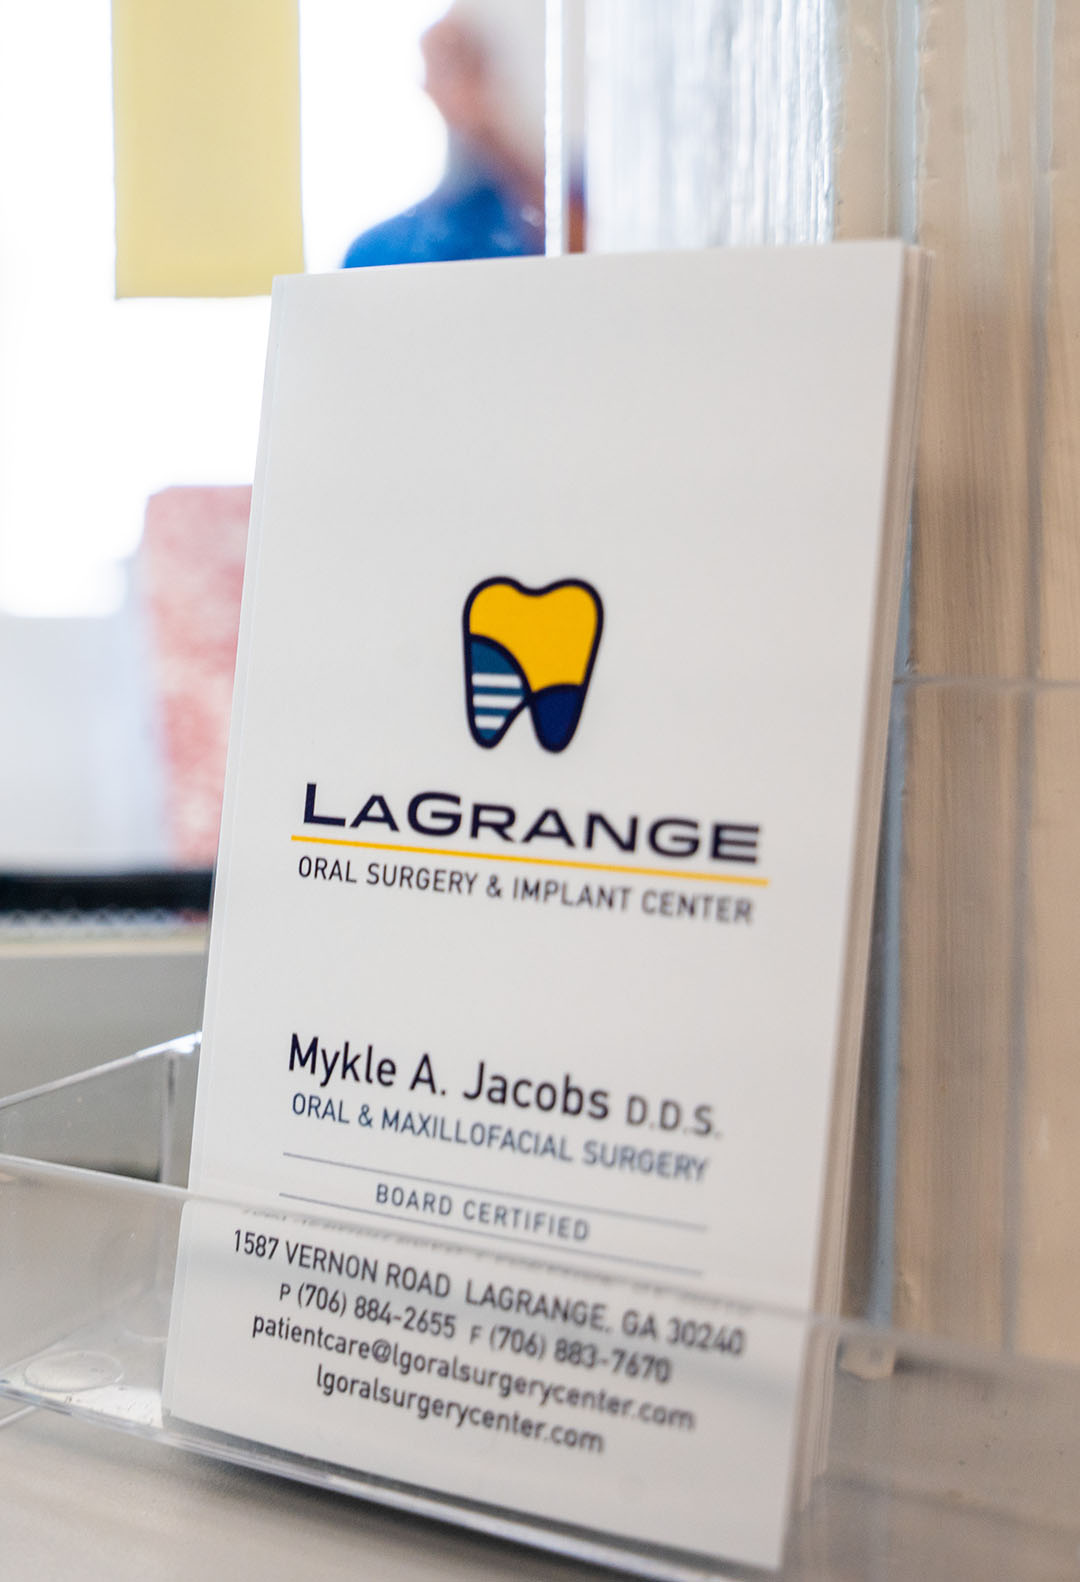 A rack card with Dr. Mykle Jacobs' information on display at LaGrange Oral Surgery and Implant Center.